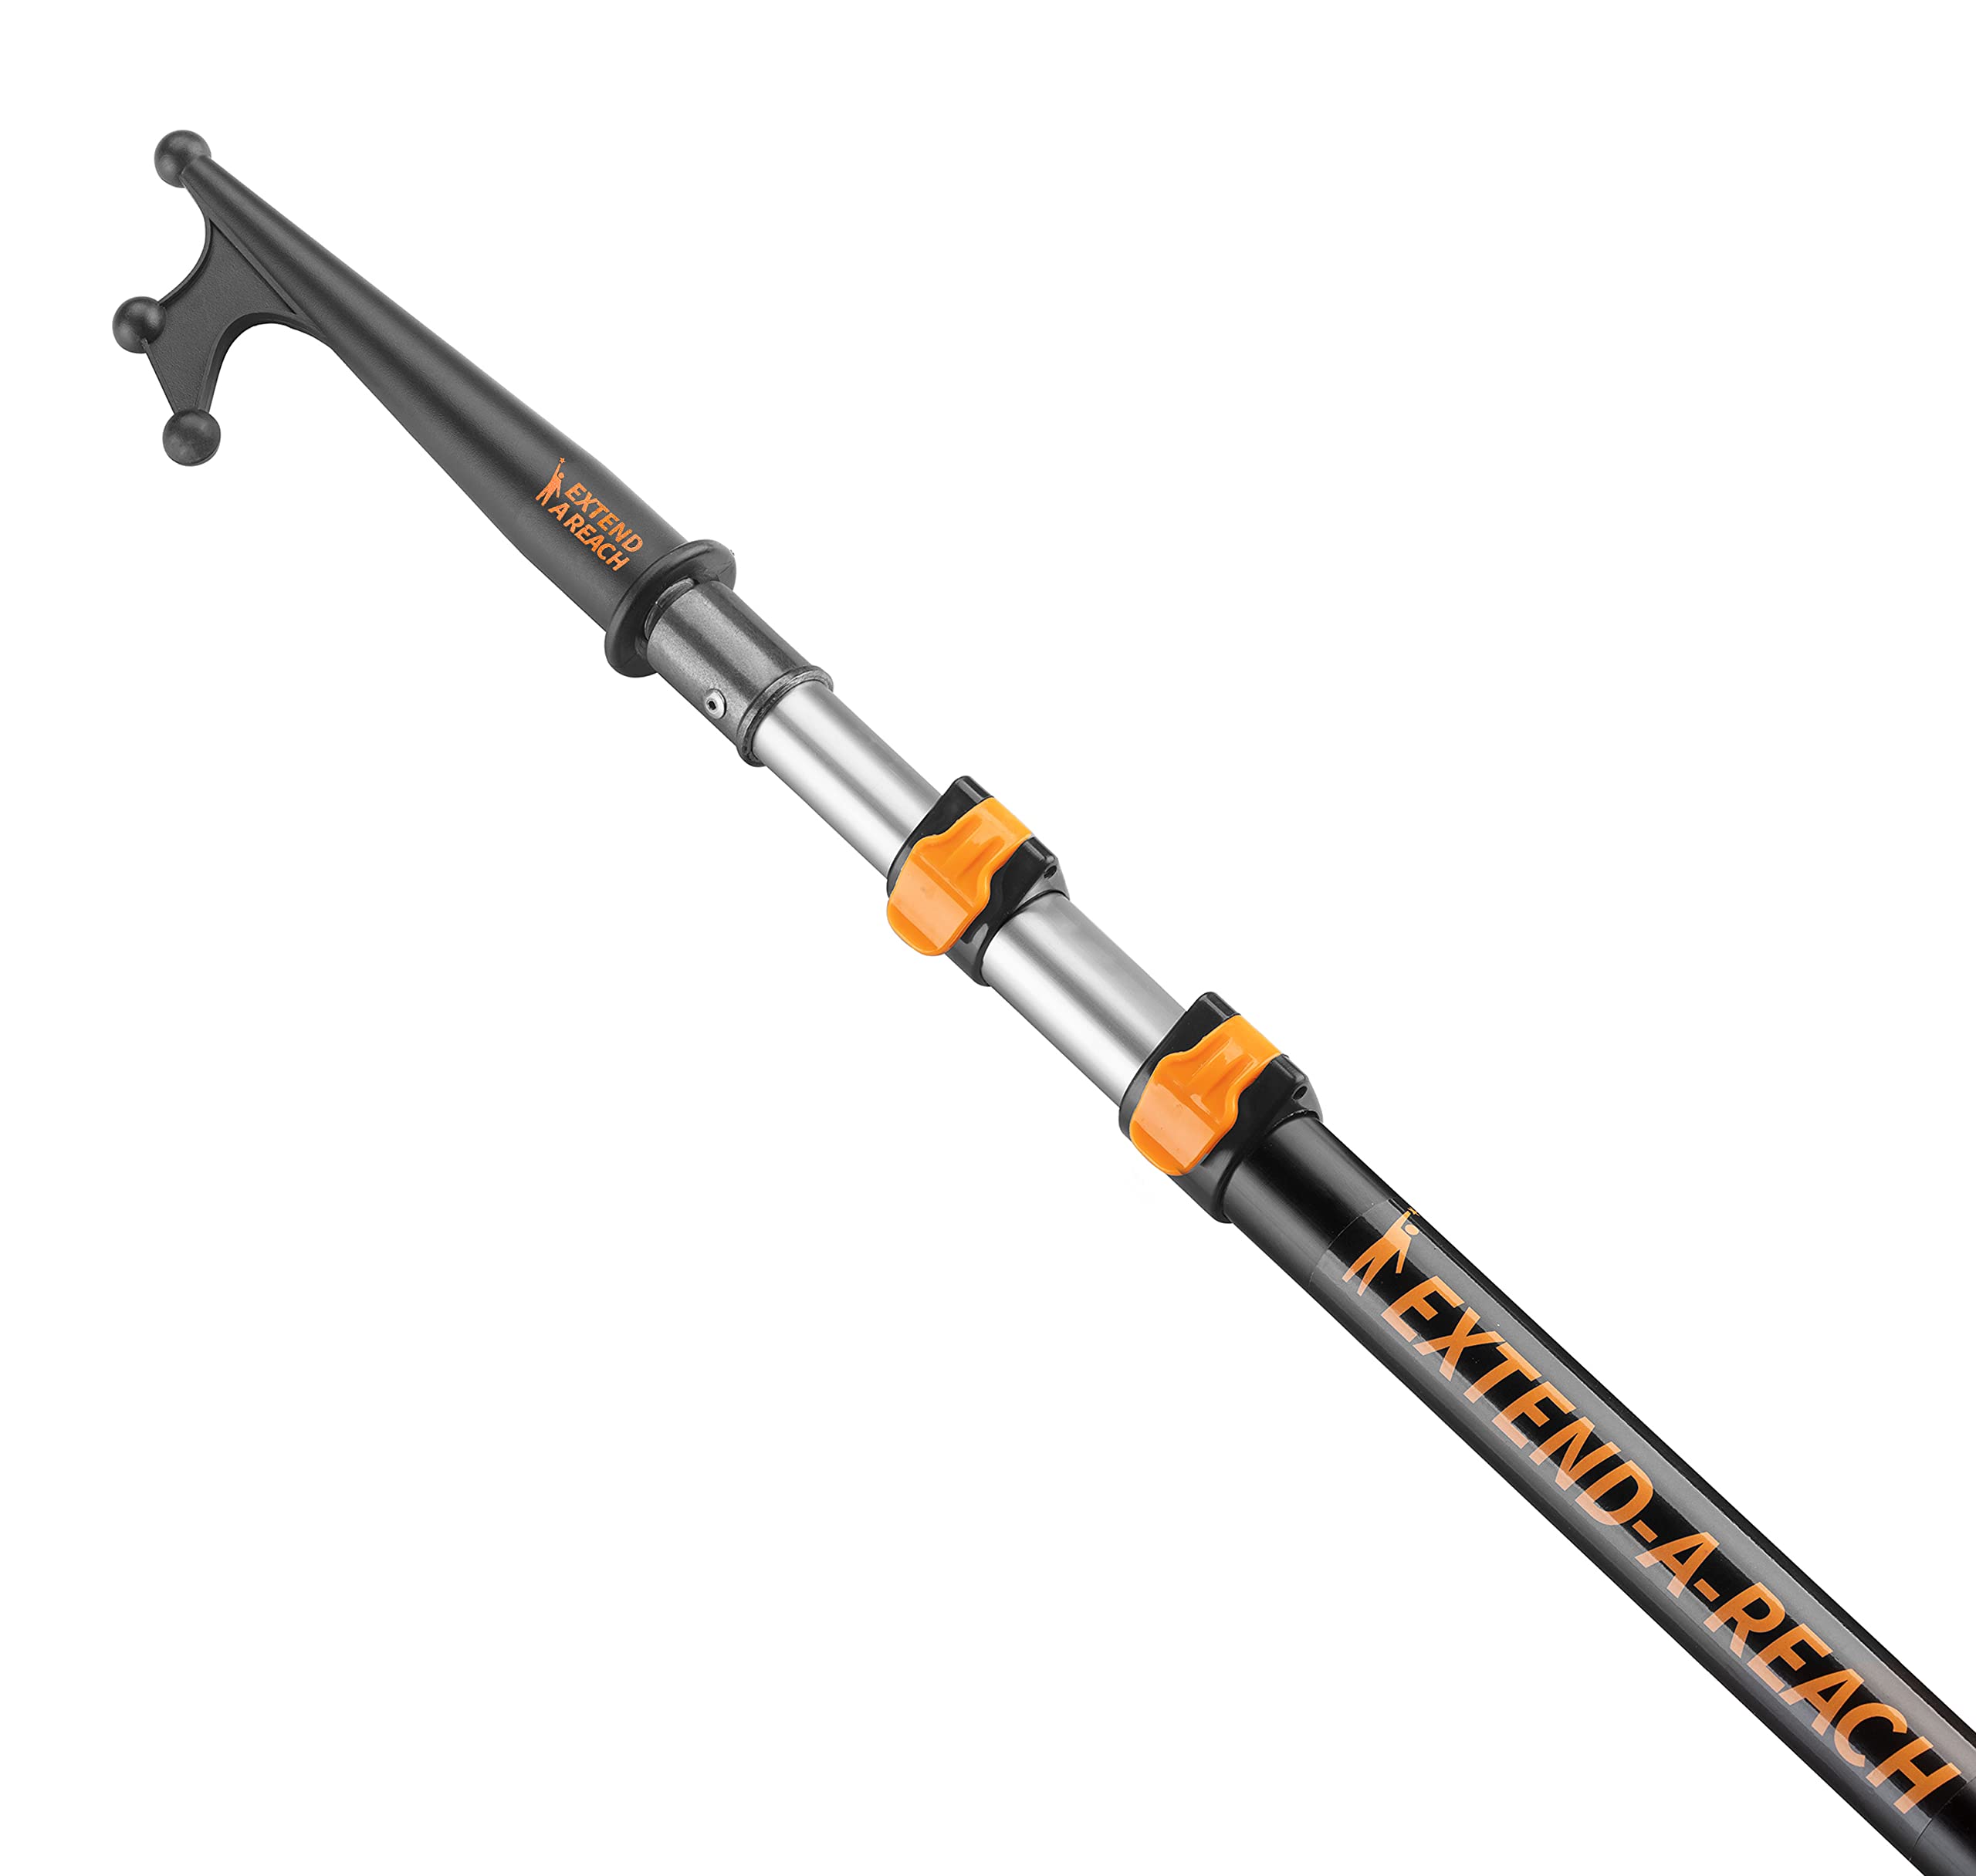 Boat Hook for Docking with Telescoping Extension Pole // Durable